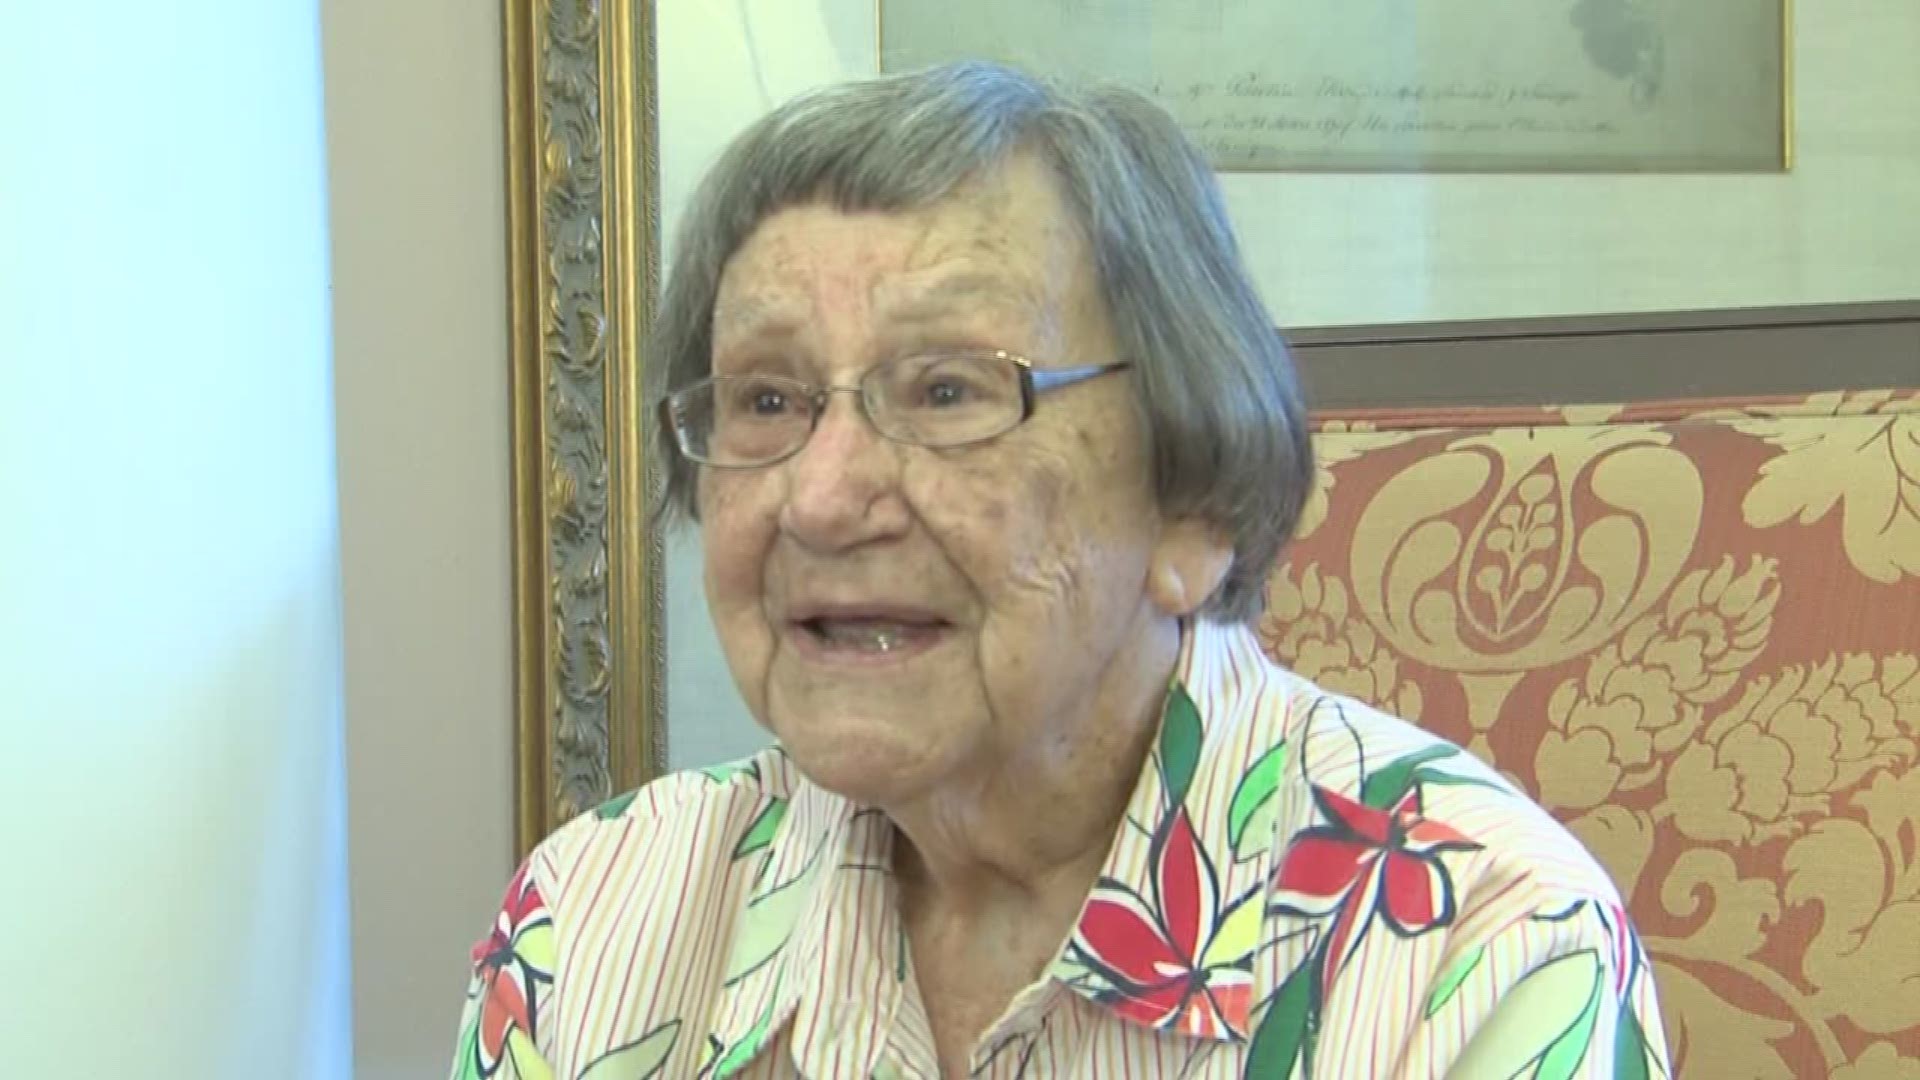 100-year-old Connie Dickinson, of Beaumont has been recognized by TexanPlus and the Houston Astros as one of the top volunteers in the state and needs your vote as she tries to win $25,000 for her volunteer organization, Golden Triangle RSVP.